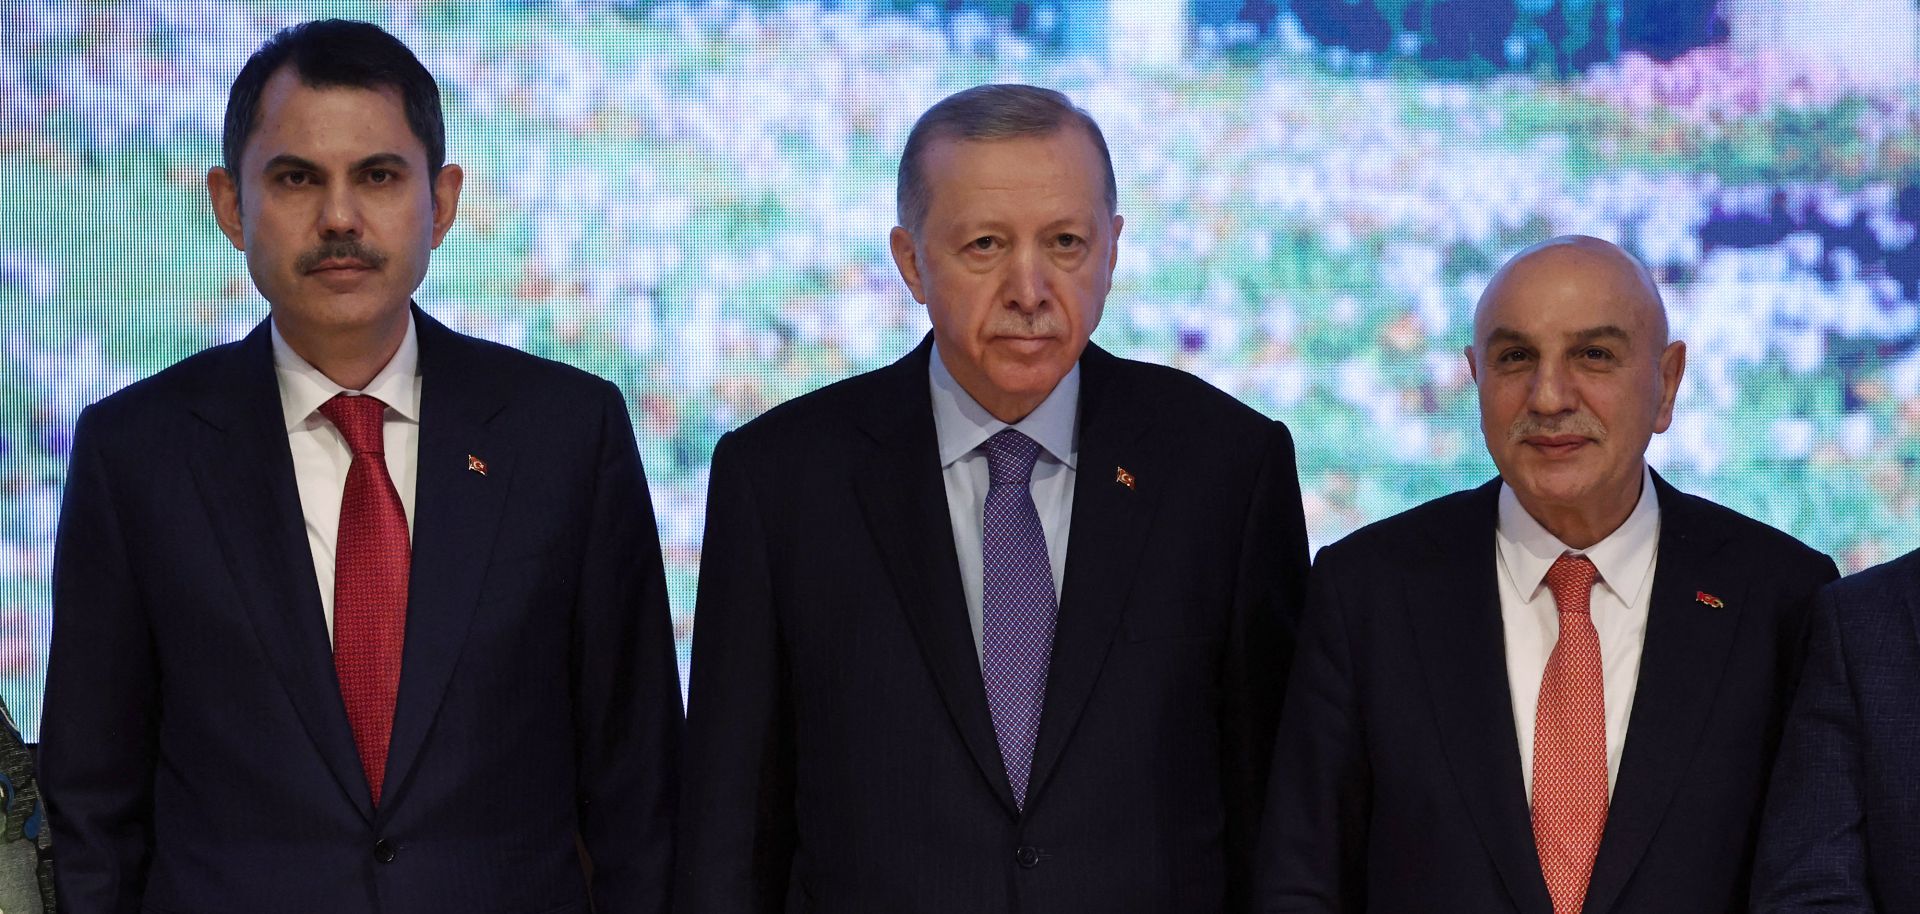 Turkish President Recep Tayyip Erdogan (center) poses with Istanbul mayoral candidate Murat Kurum (left) and Ankara mayoral candidate Turgut Altinok (right) during the presentation of the Justice and Development Party's election manifesto in Ankara, Turkey, on Jan. 30, 2024.